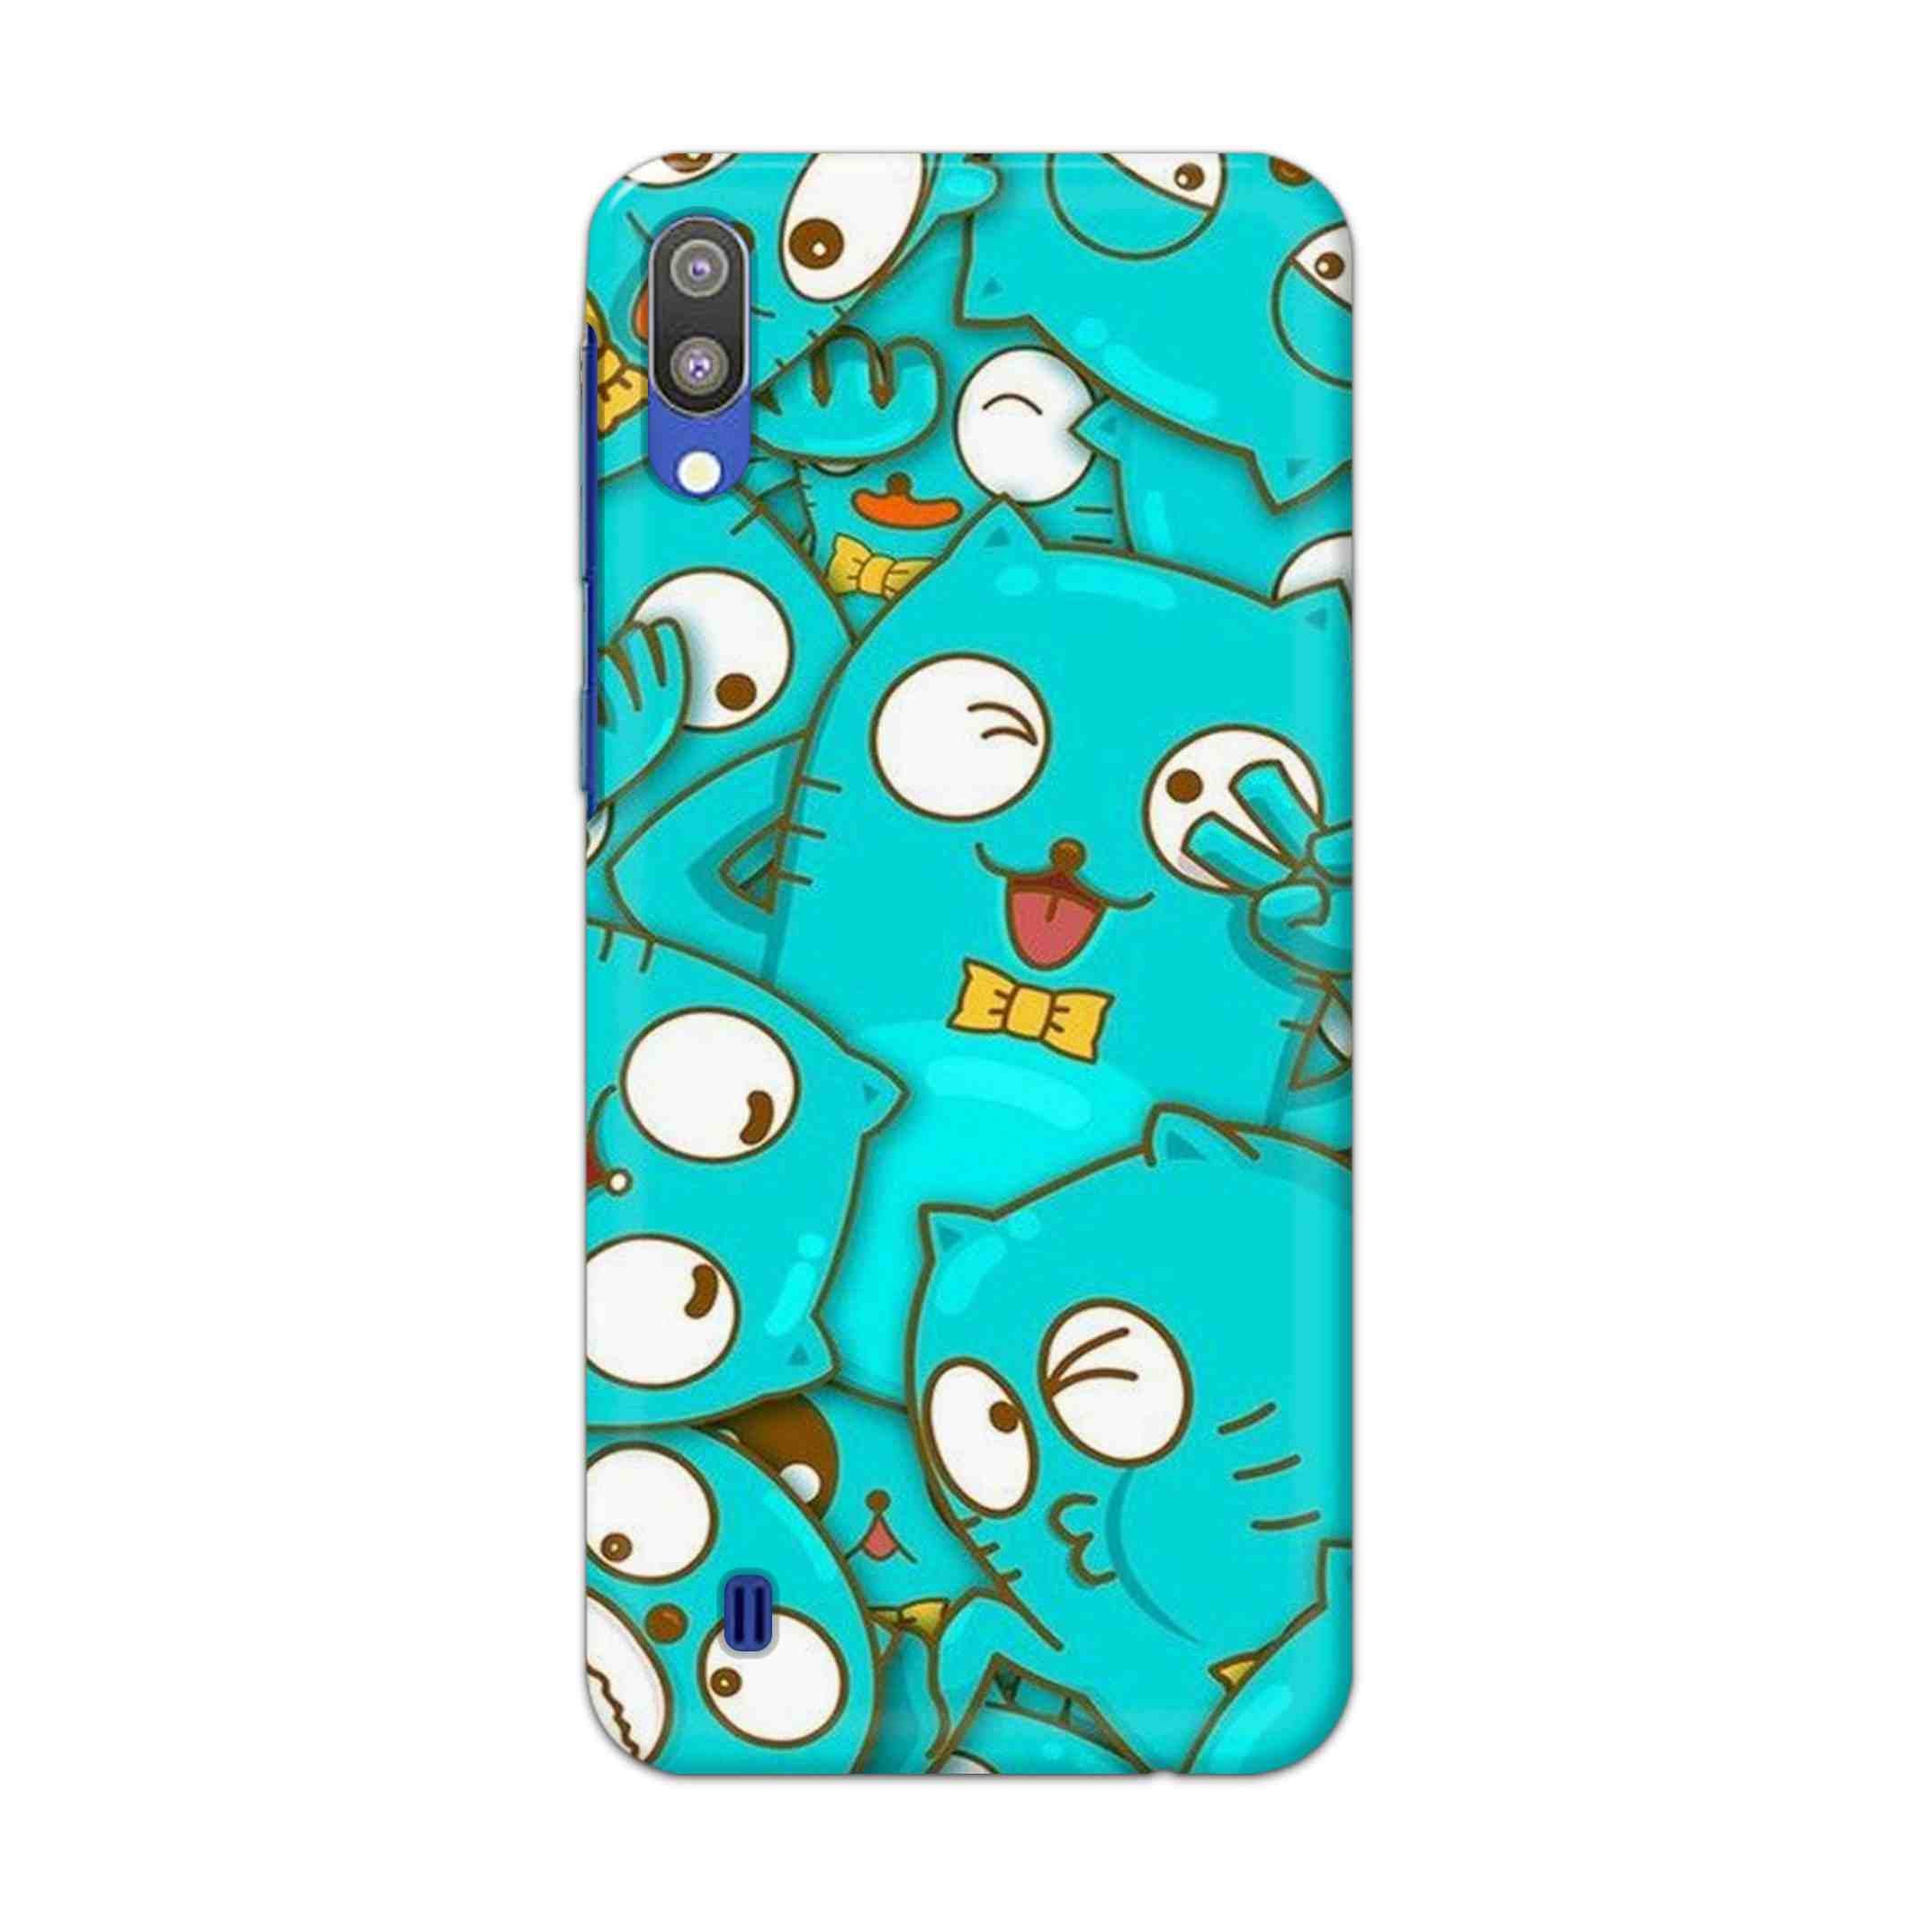 Buy Cat Hard Back Mobile Phone Case Cover For Samsung Galaxy M10 Online